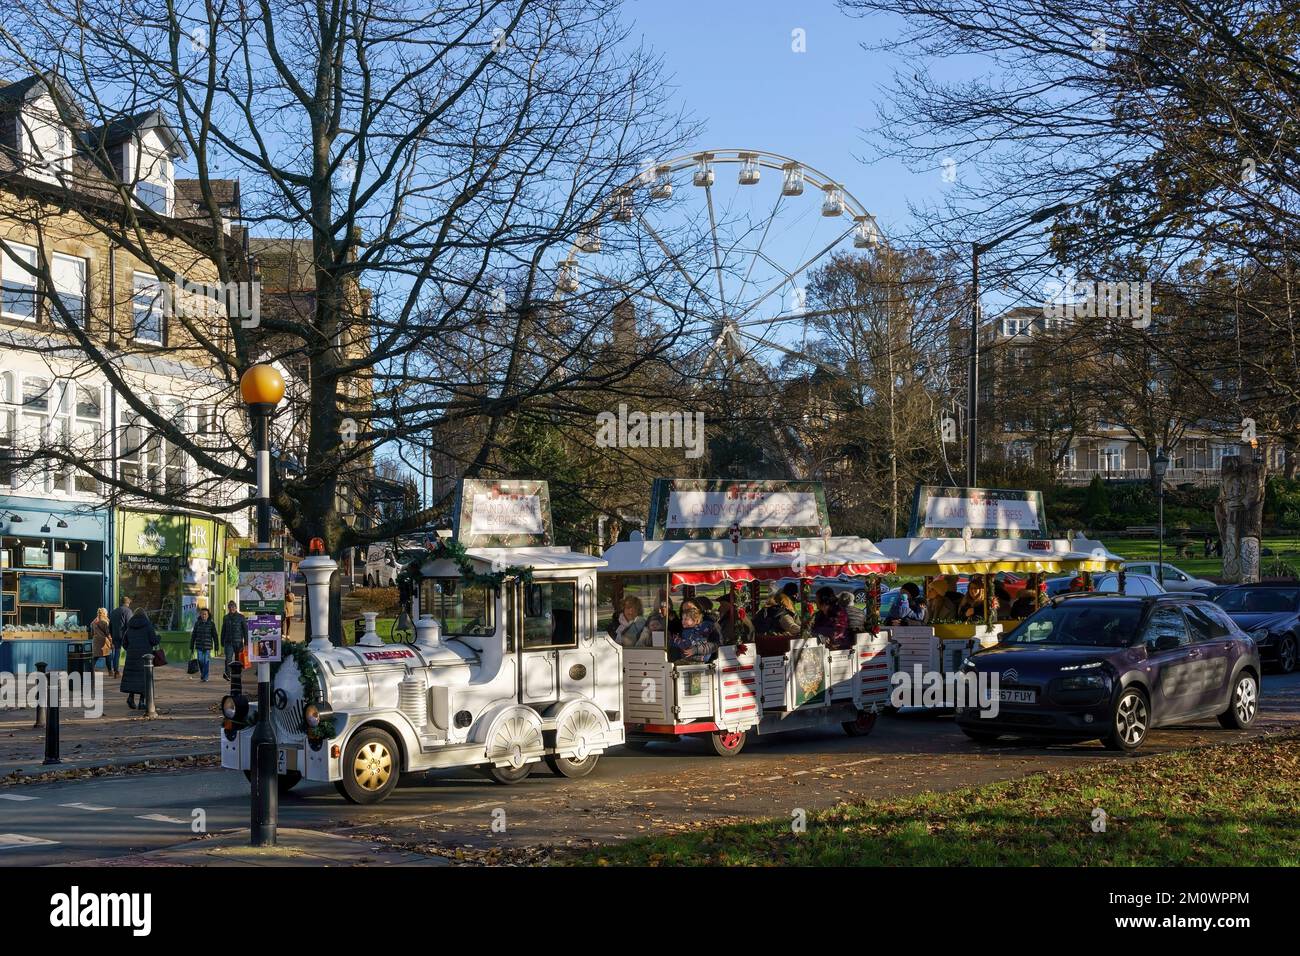 Christmas shoppers on the Candy Cane Express Road Train ride along a street with the Ferris wheel as a backdrop, in Harrogate,Yorkshire, England, UK. Stock Photo